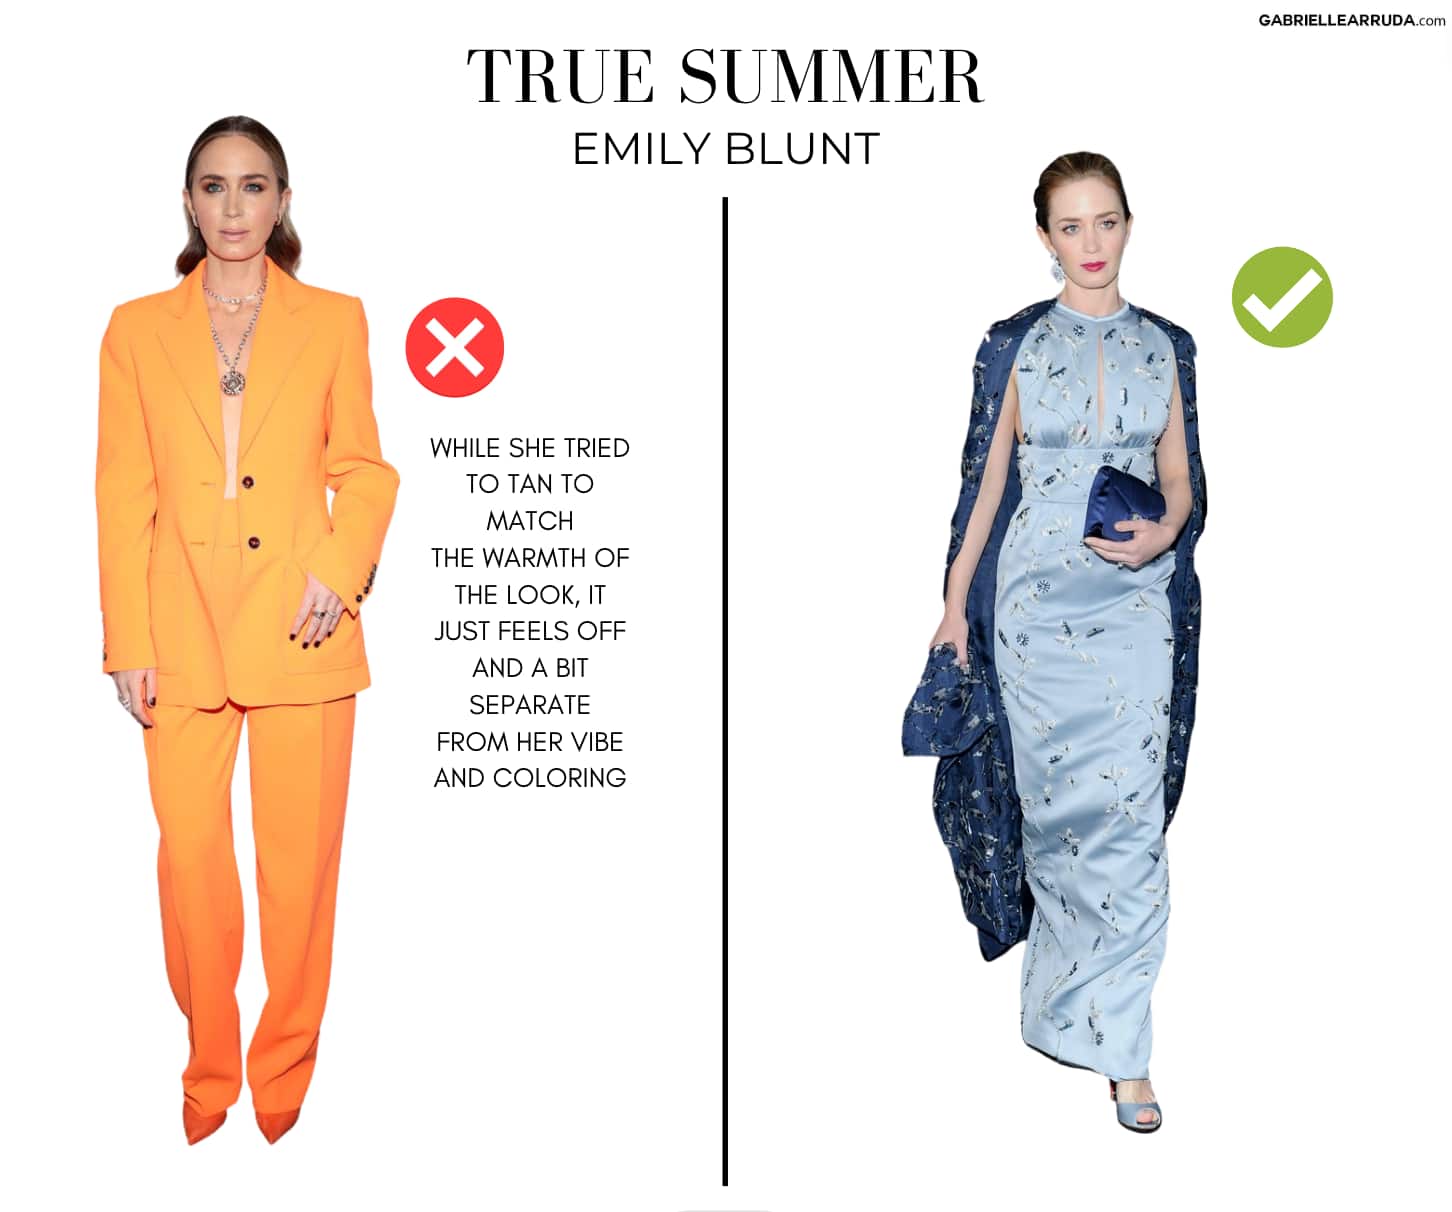 emily blunt in and out of true summer colors 